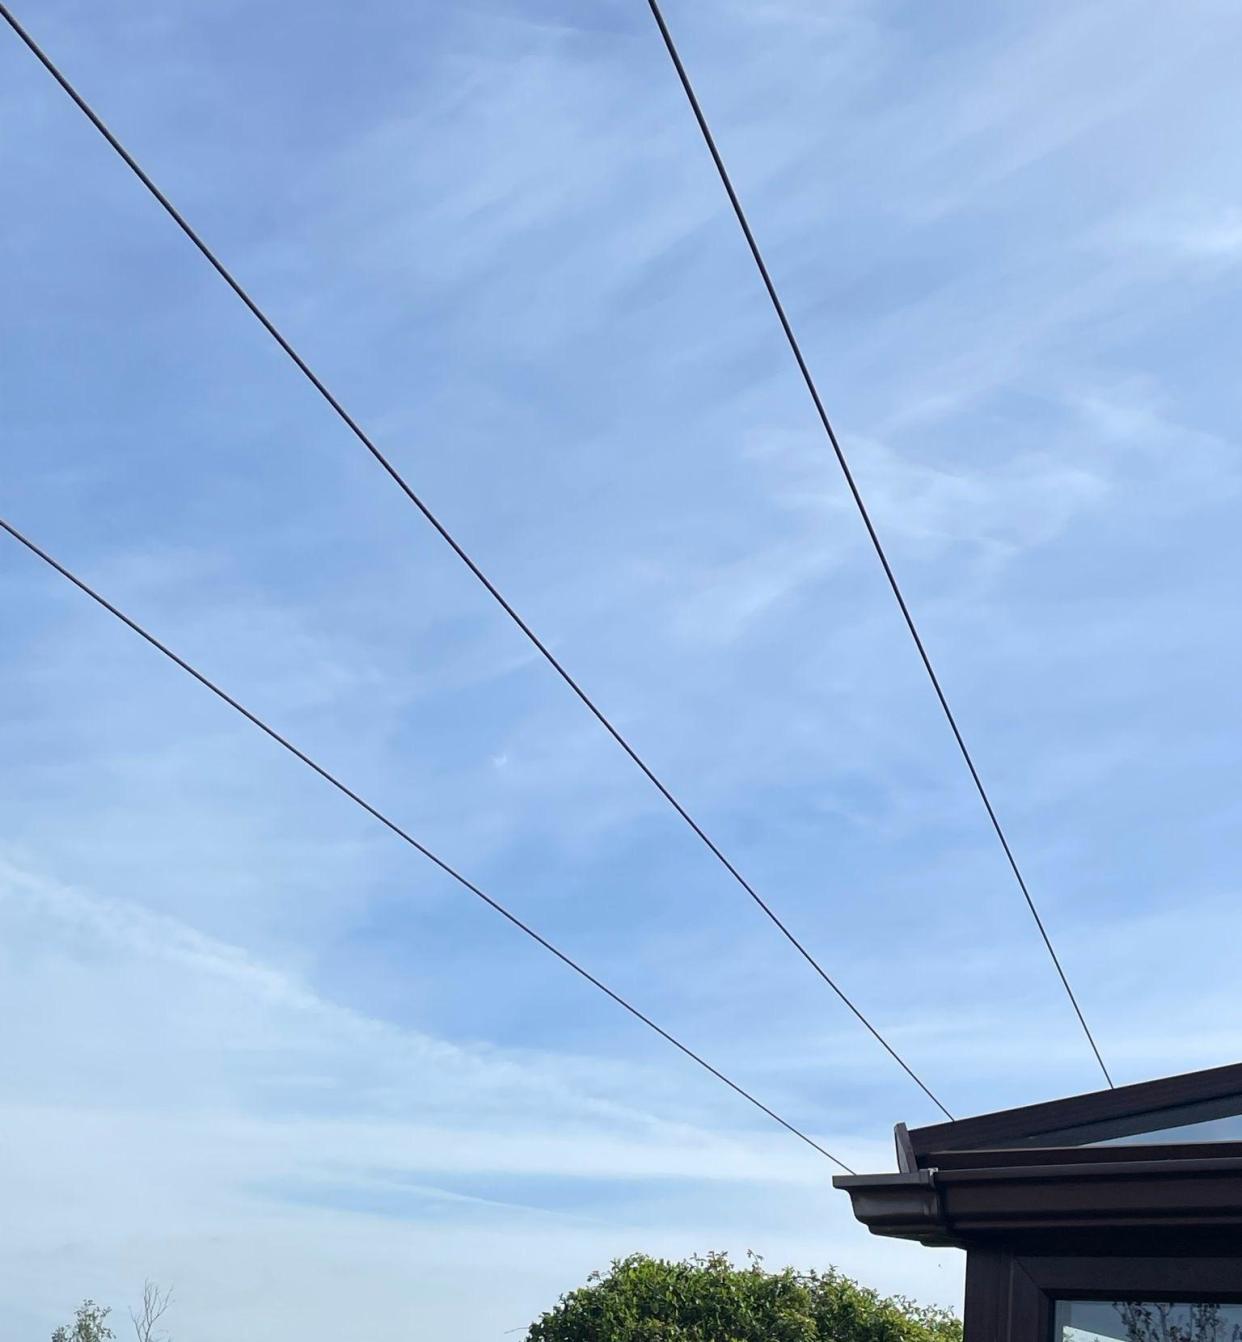 A picture of the power lines, which can be seen suspended above the garden against a blue sky. 